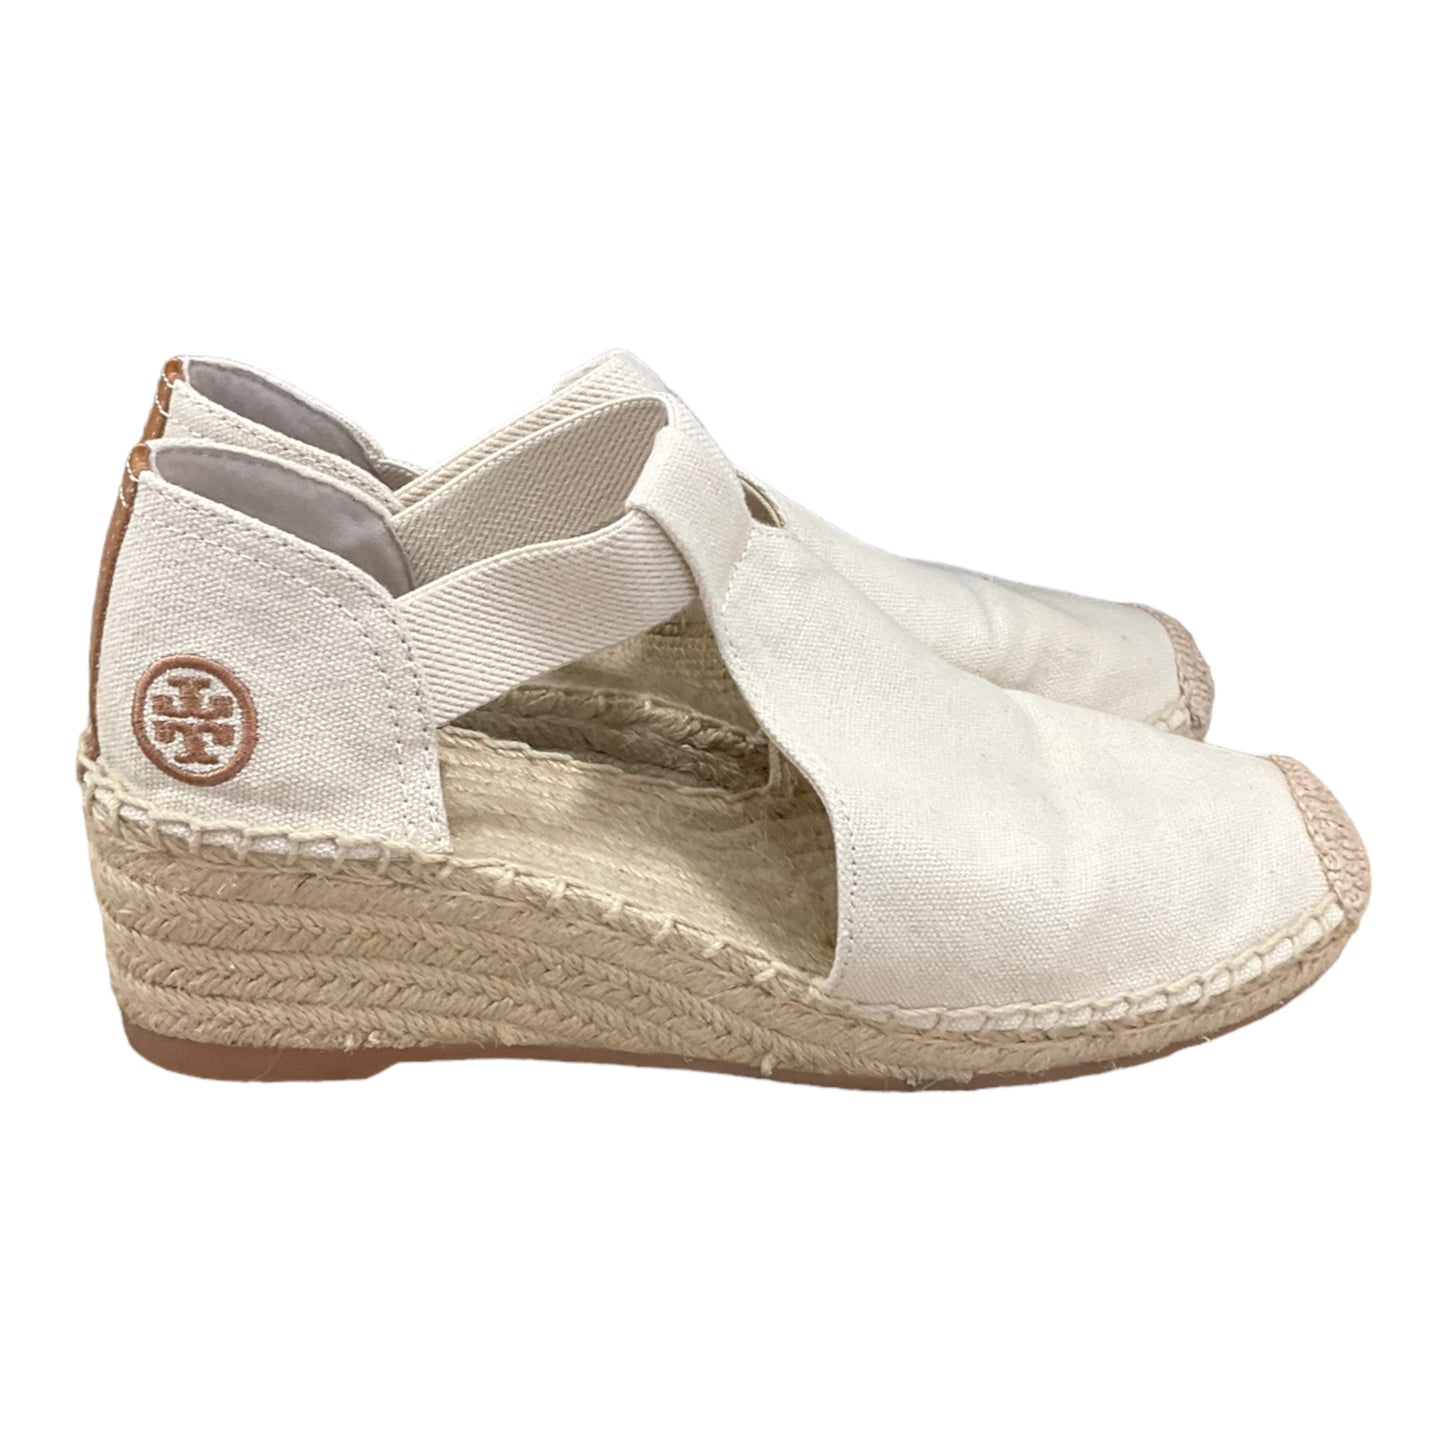 Shoes Heels Espadrille Wedge By Tory Burch  Size: 8.5